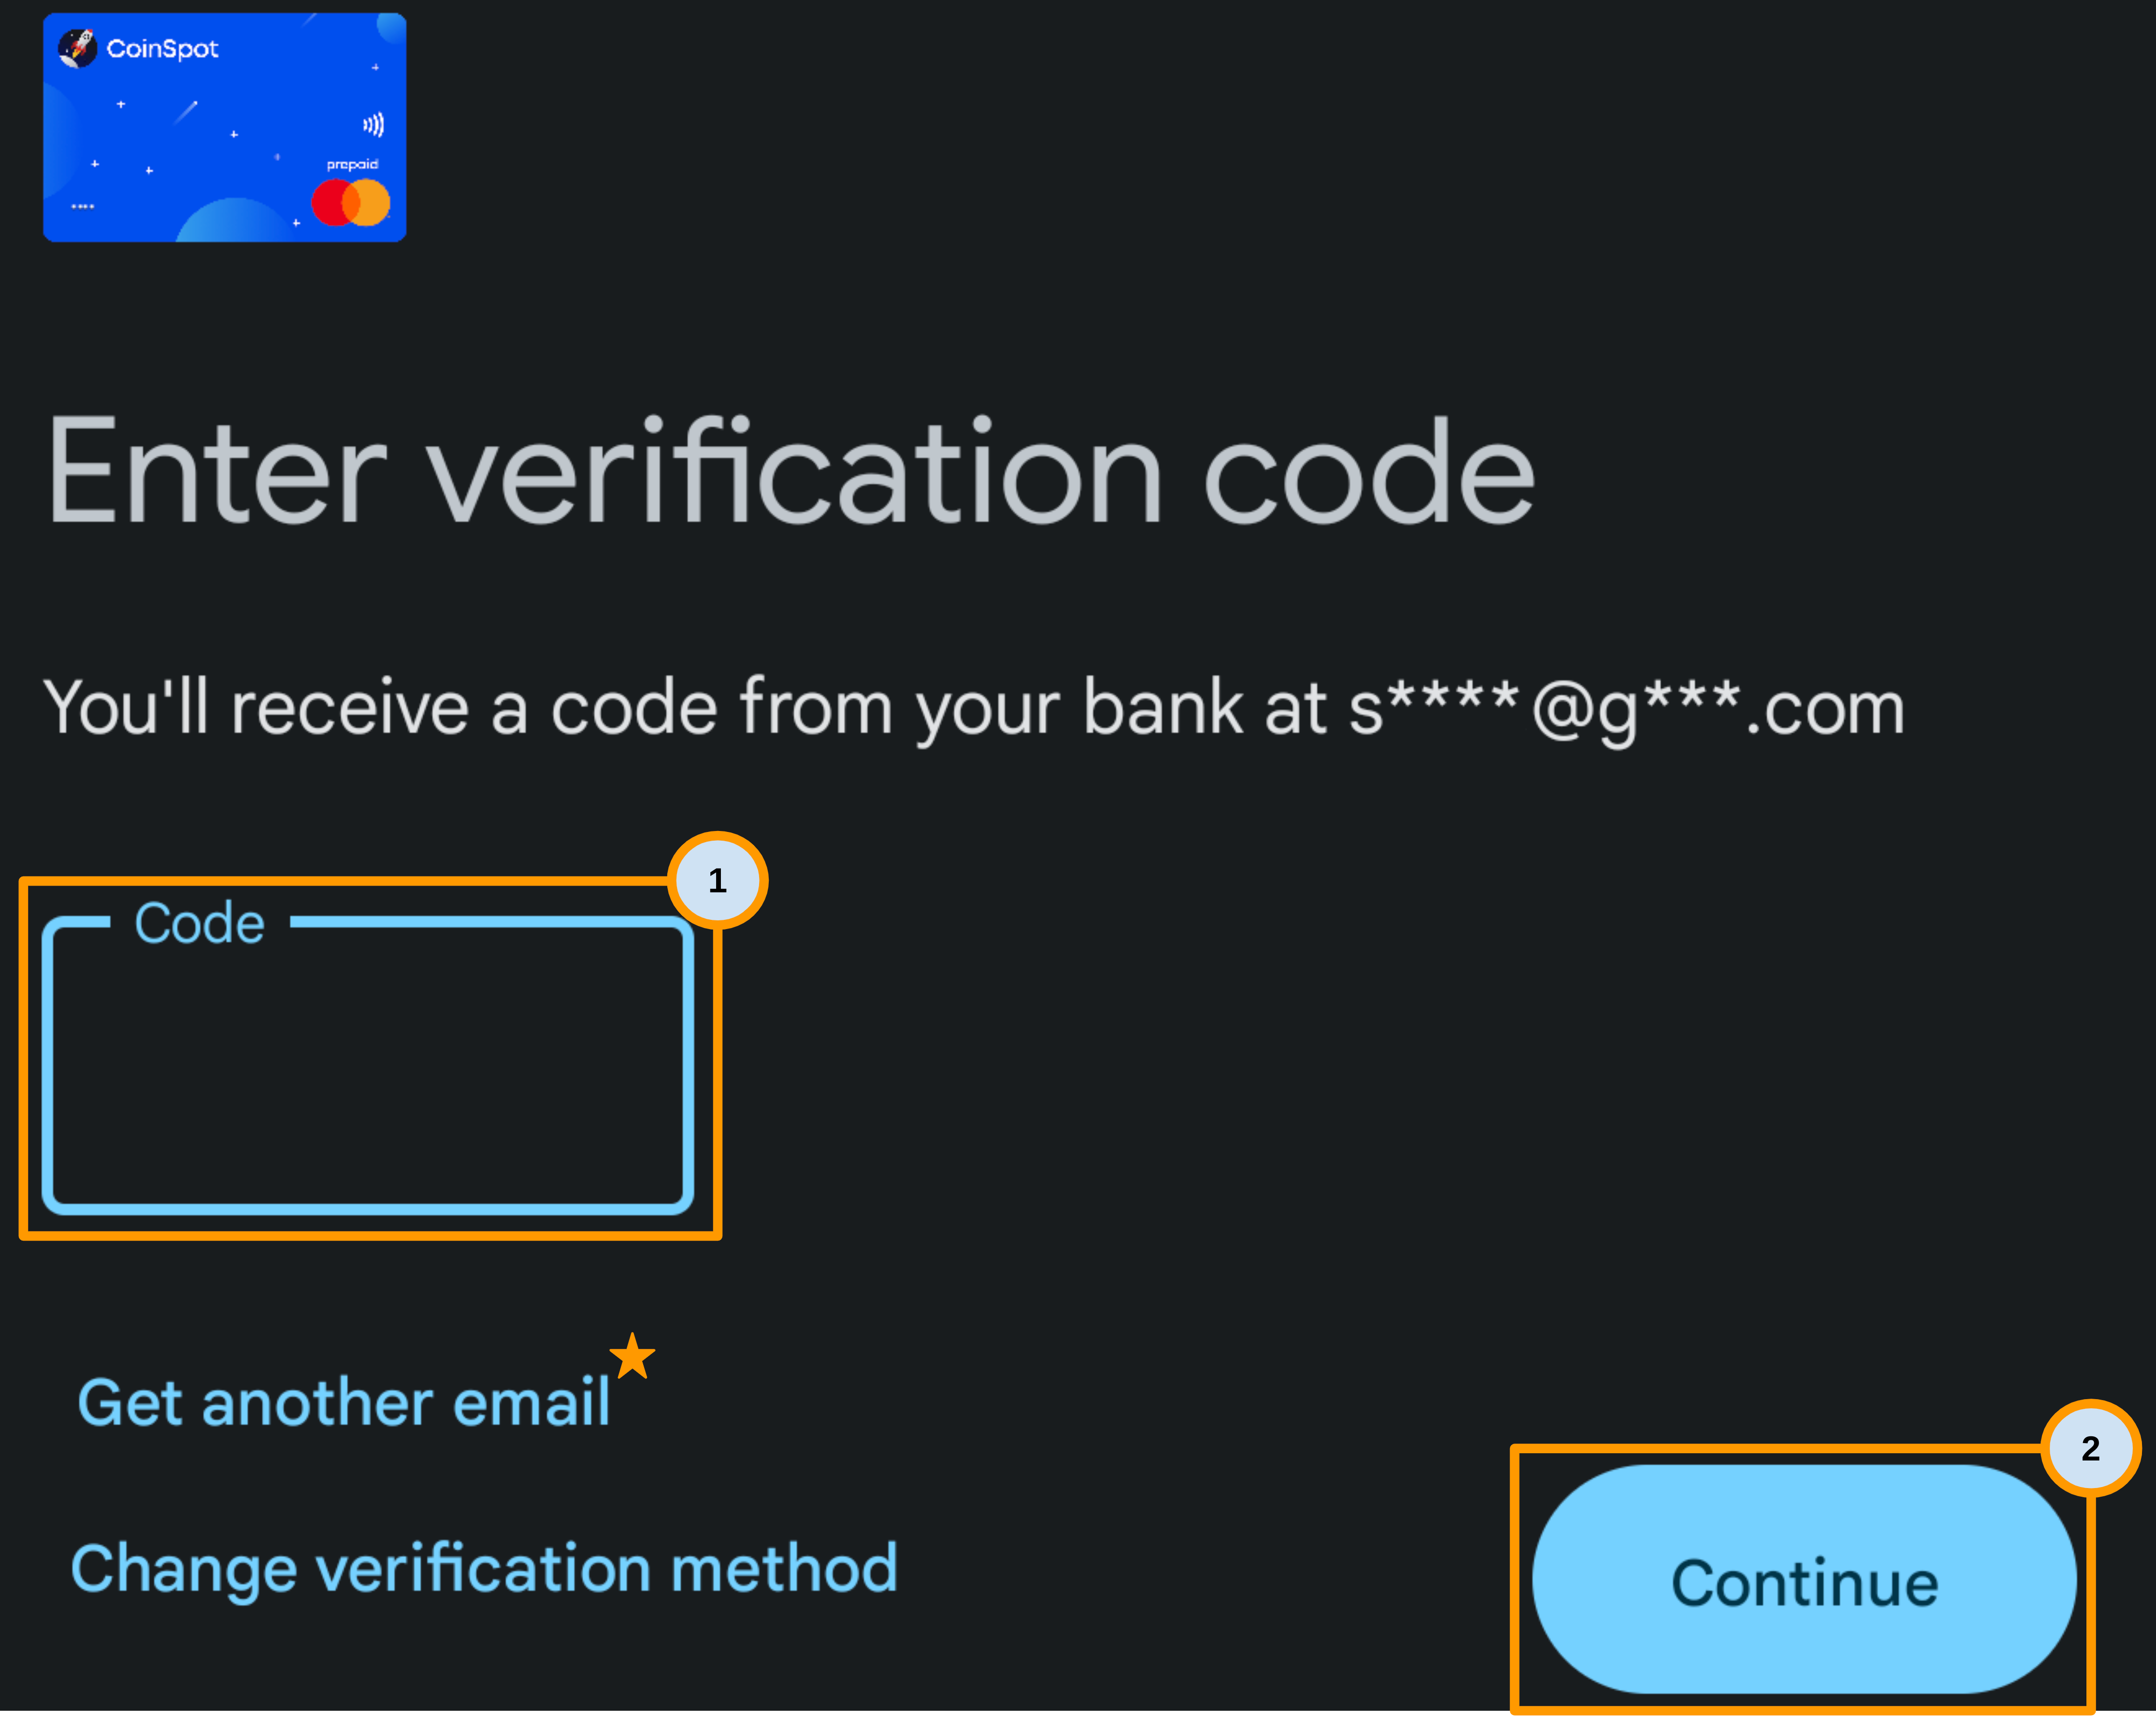 CS_Card_-_Google_Pay_-_Verification_Code_Email.png